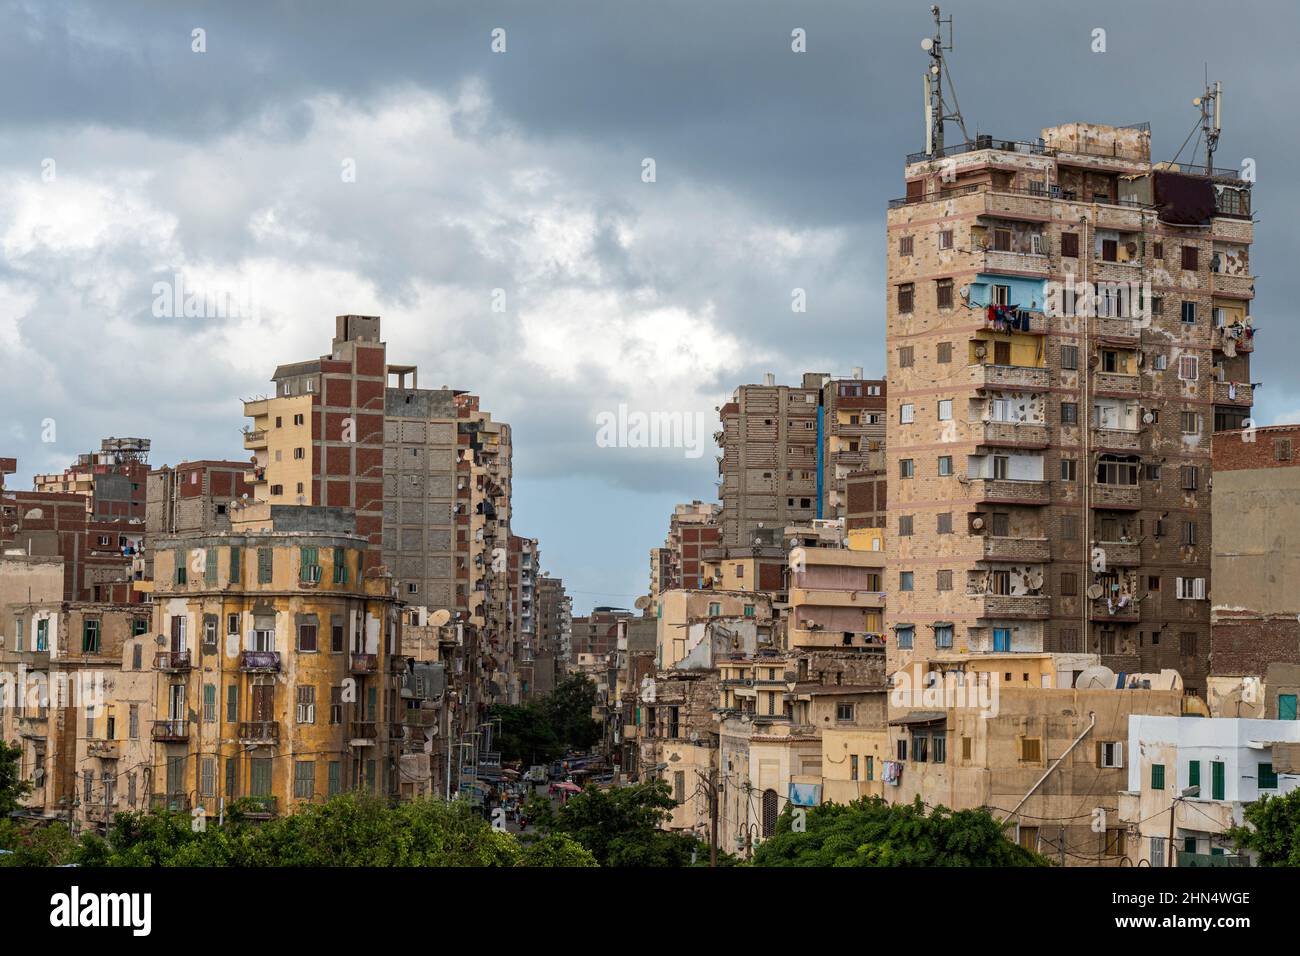 An apartment building in Africa in a poor neighborhood. Stock Photo